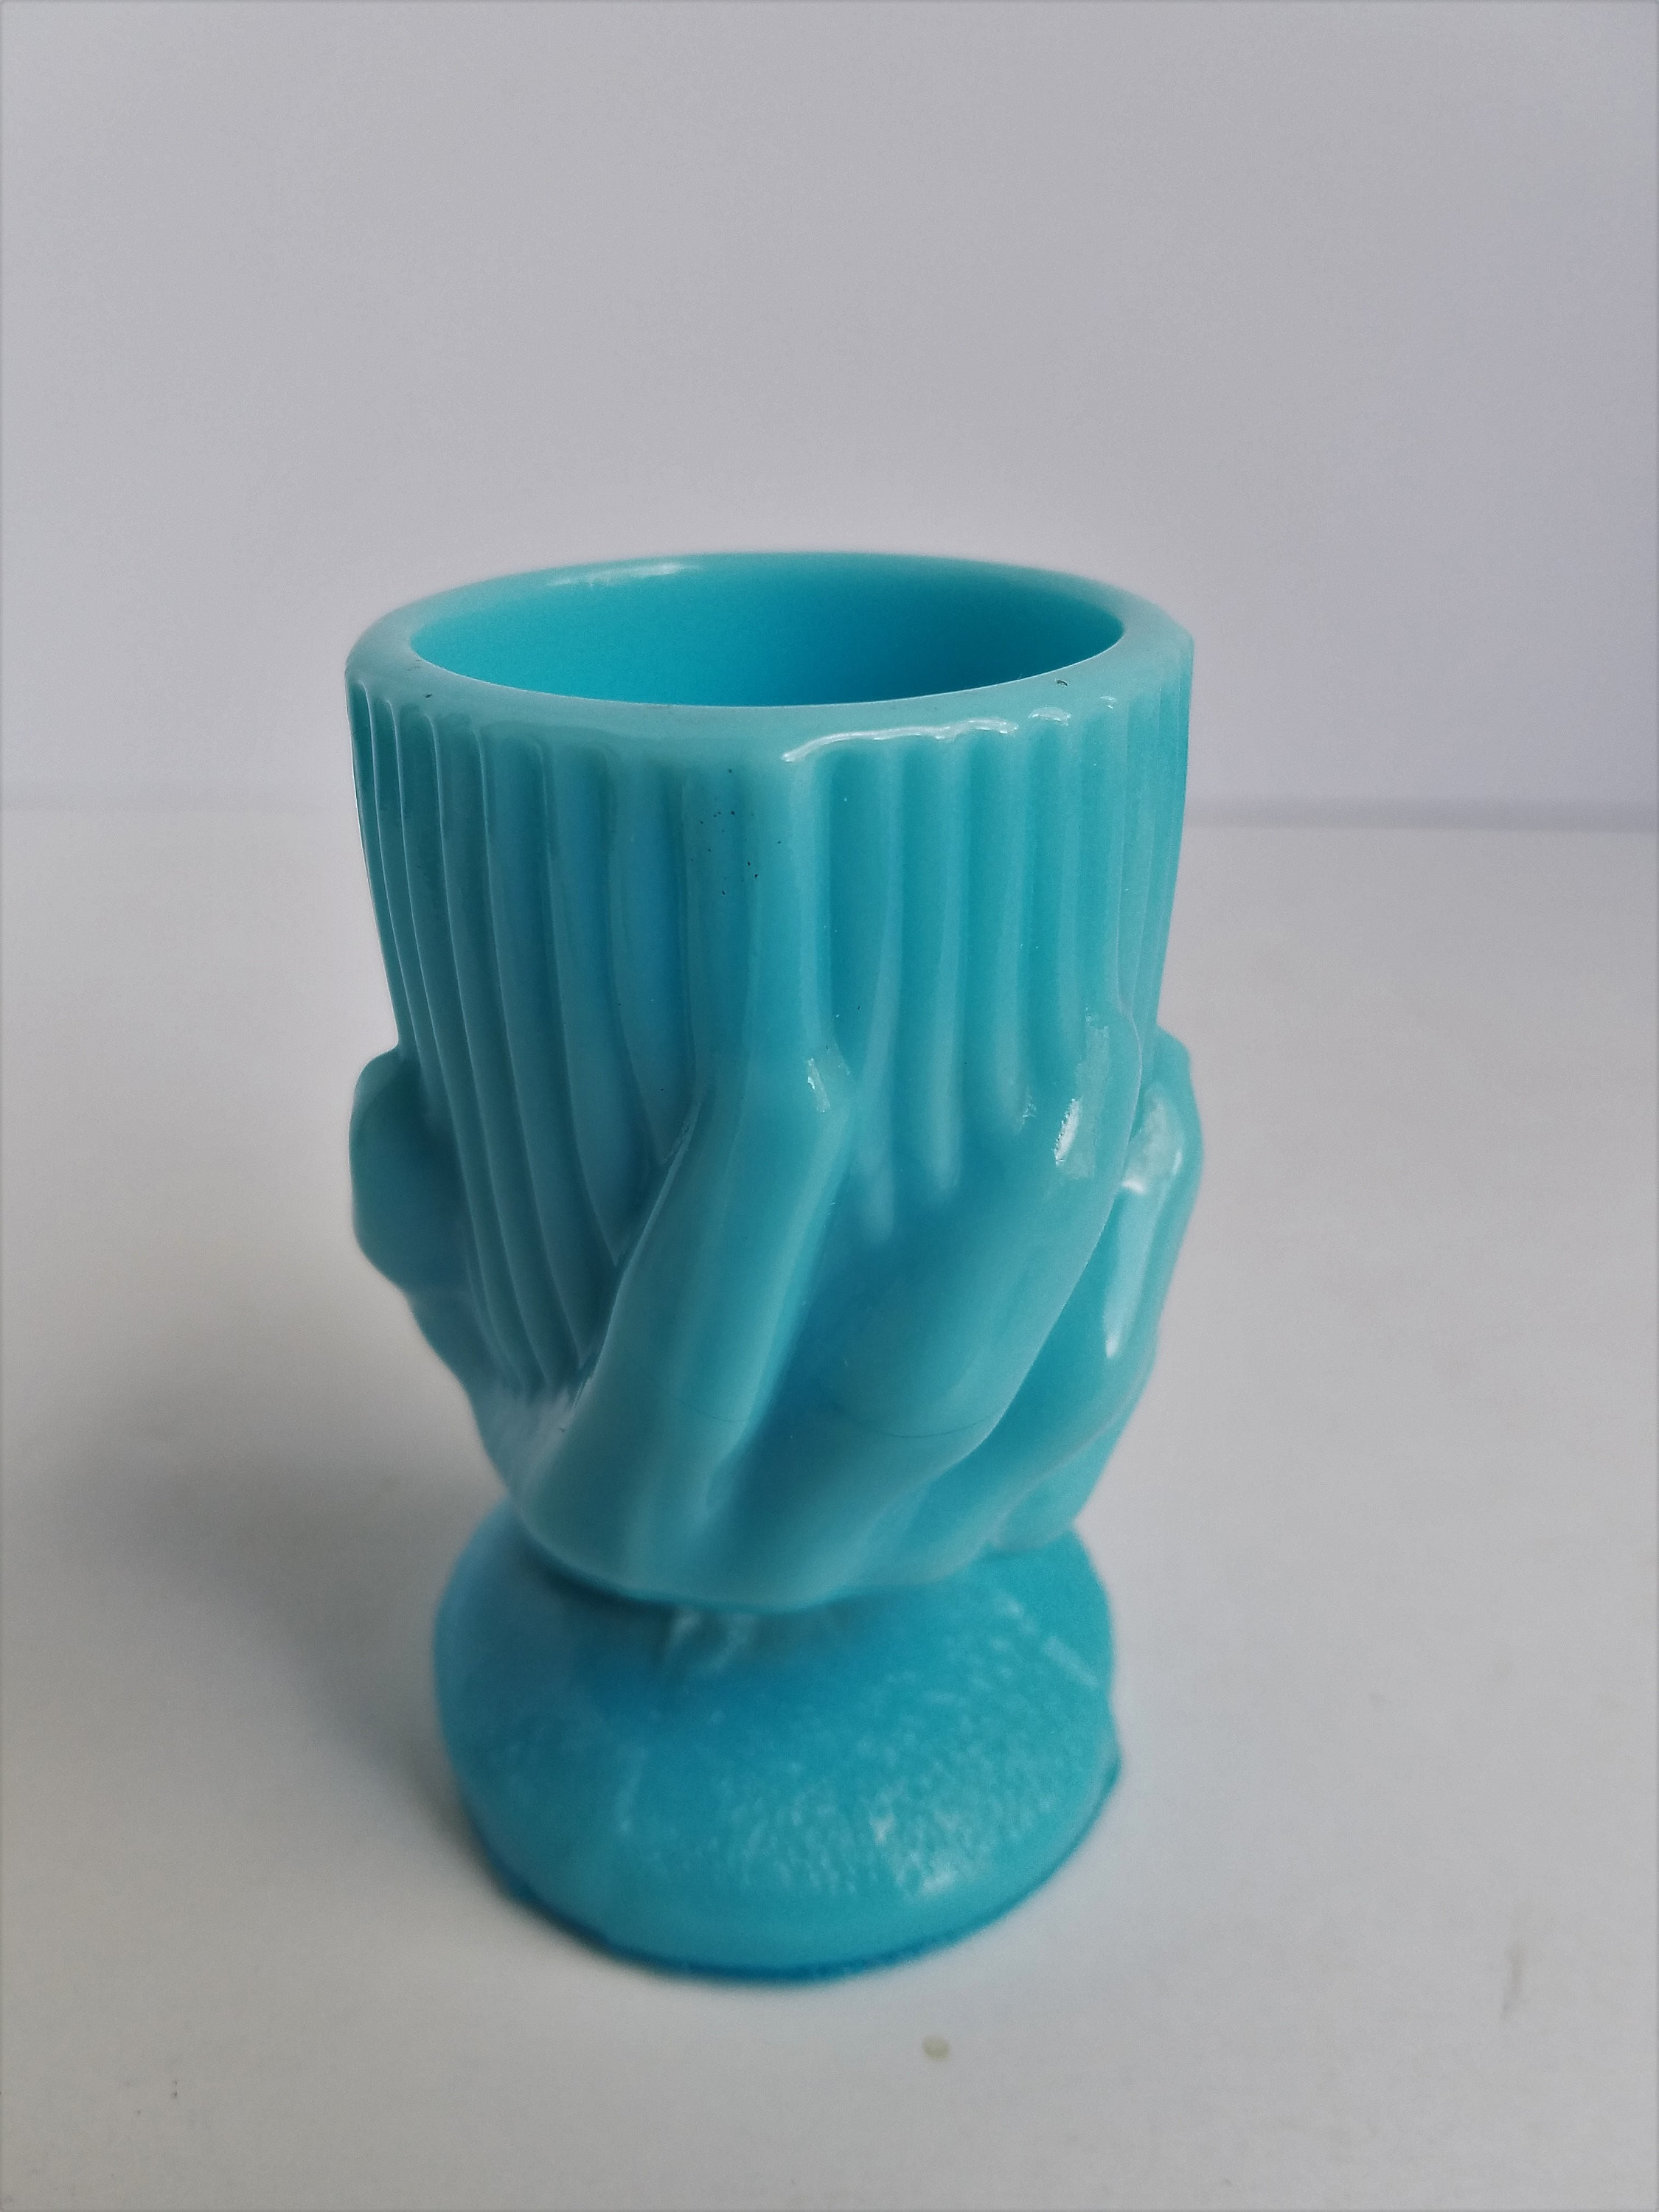 23 attractive Rueven Art Glass Vase 2024 free download rueven art glass vase of vintage ribbed with hand french portieux vallerysthal blue in dc29fc294c28ezoom